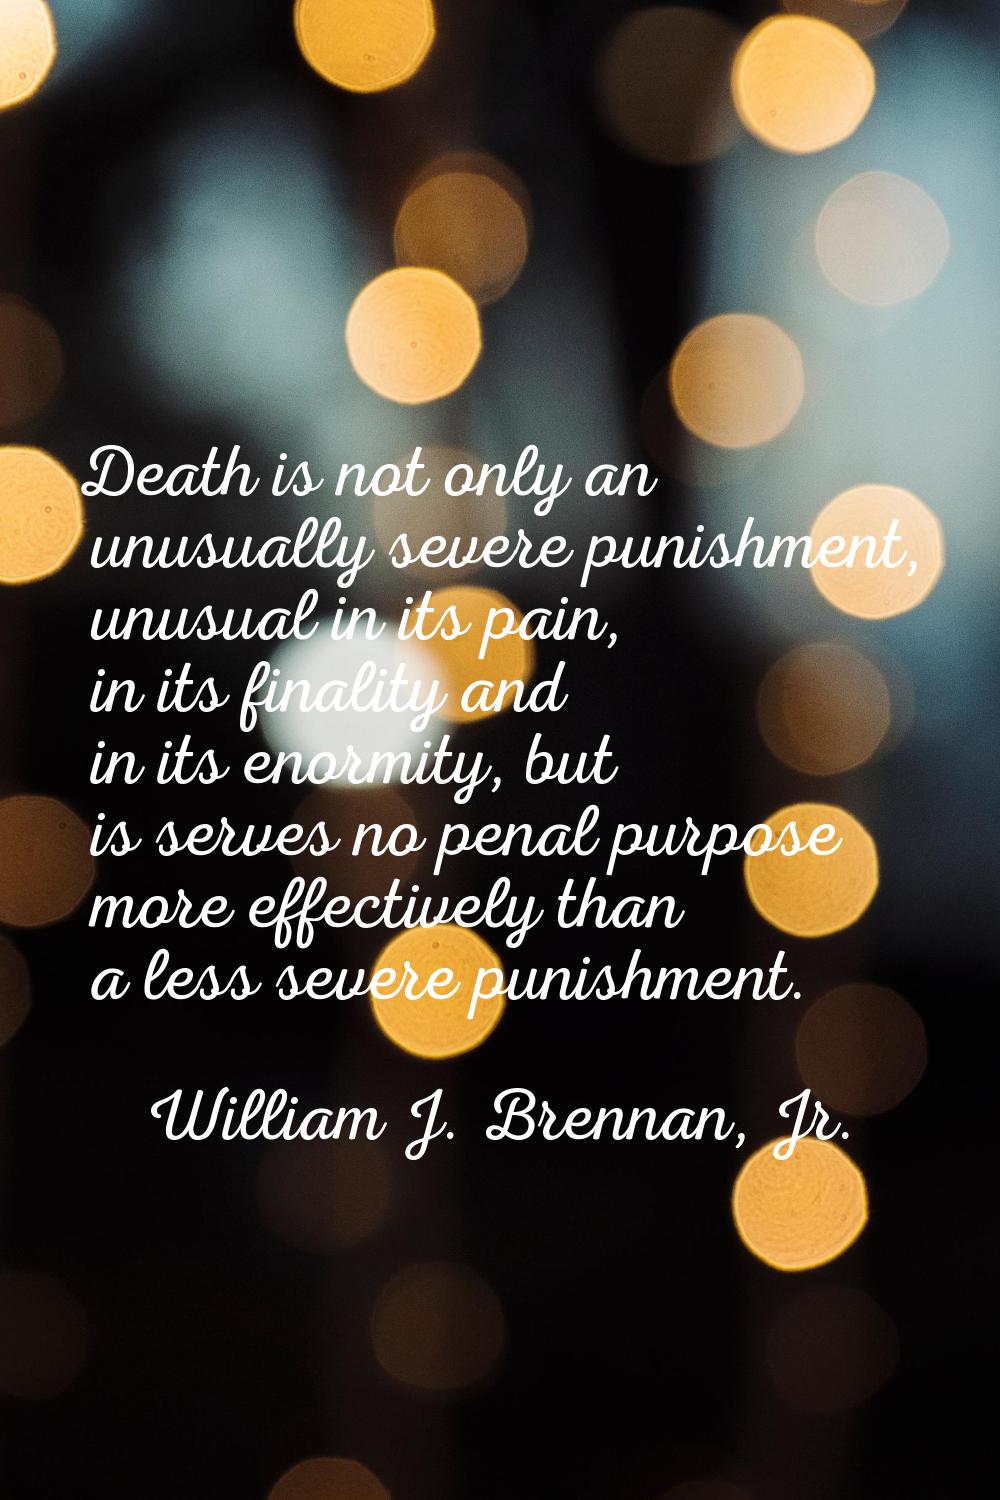 Death is not only an unusually severe punishment, unusual in its pain, in its finality and in its e